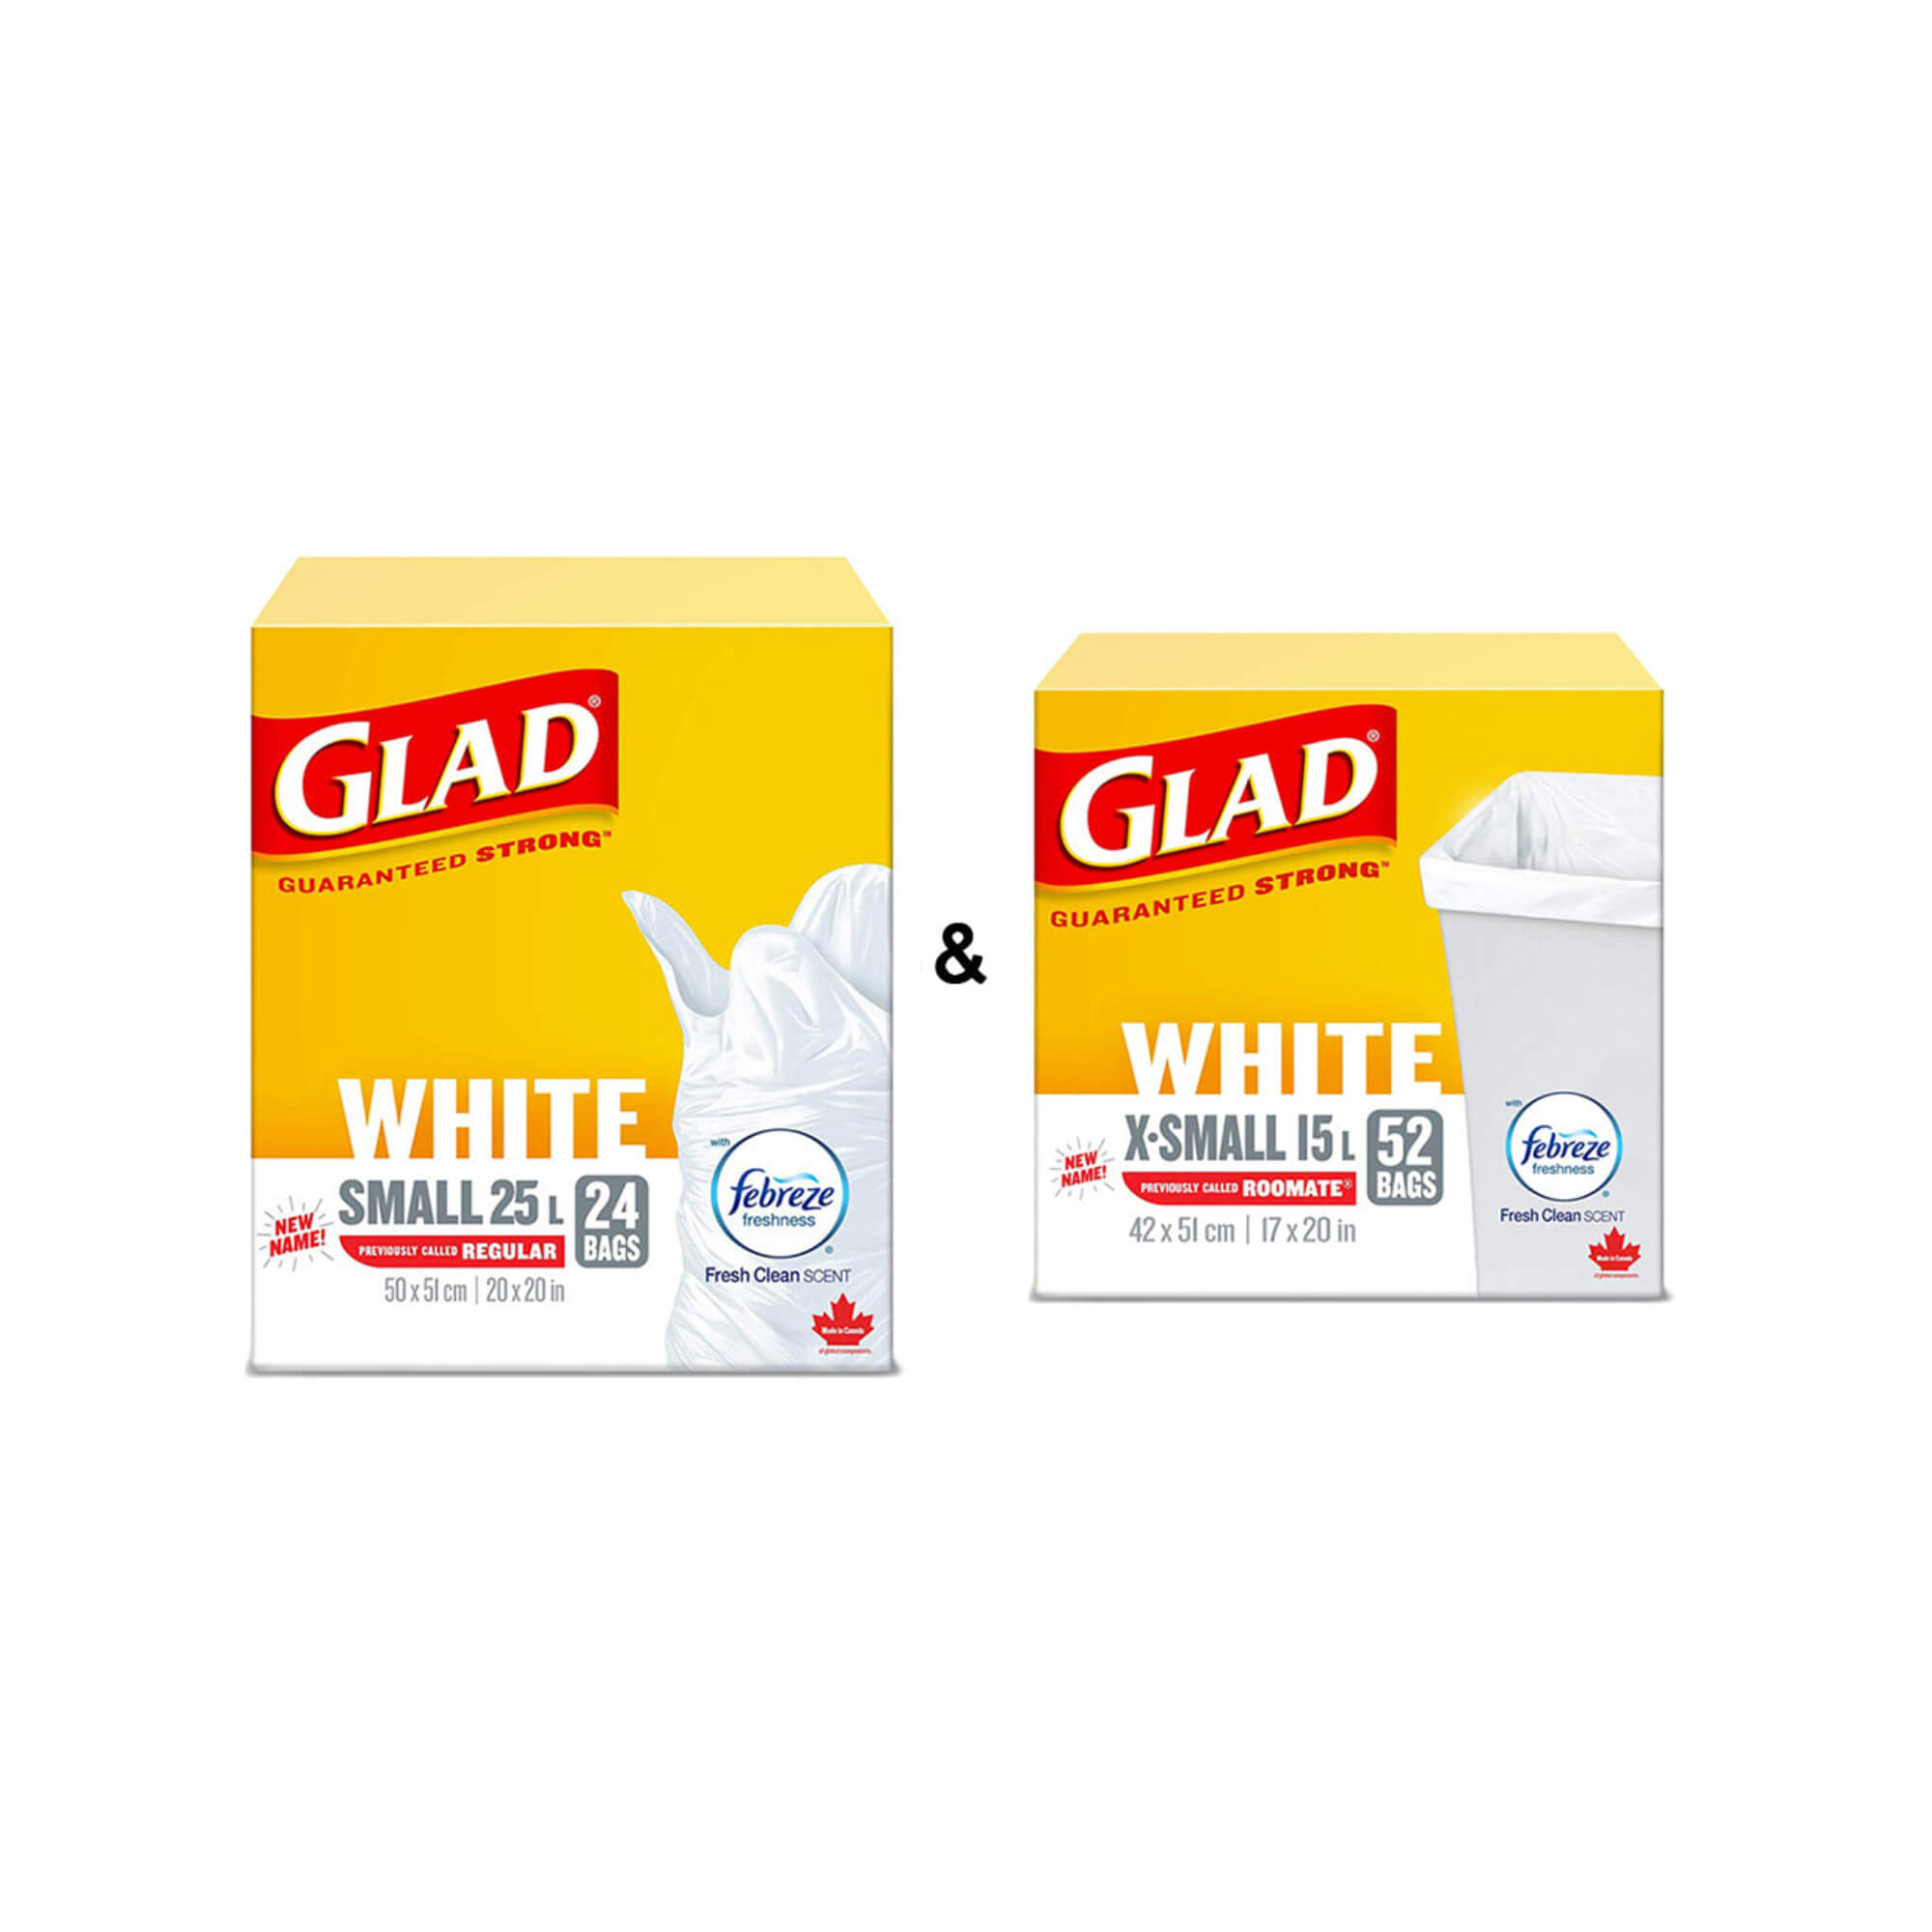 Glad White Garbage - Small 25 L, 24 & X-Small 15 L,52 Bags